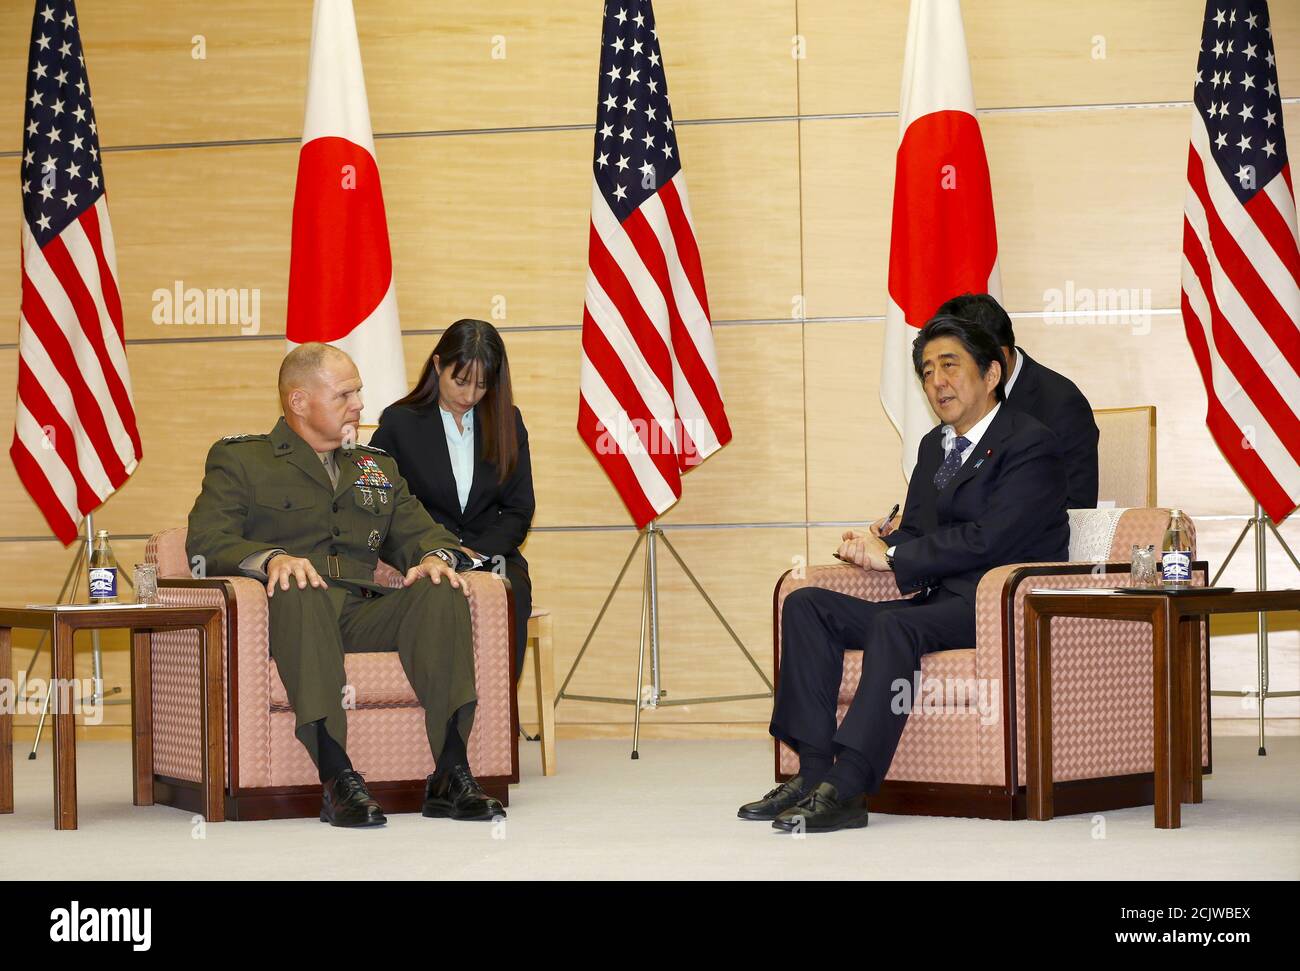 Gen. Robert B. Neller, U.S. Commandant of the Marine Corps, talks with Japanese Prime Minister Shinzo Ab at Abe's official residence in Tokyo, Wednesday, Nov. 25, 2015. REUTERS/Shizuo Kambayashi/Pool Stock Photo